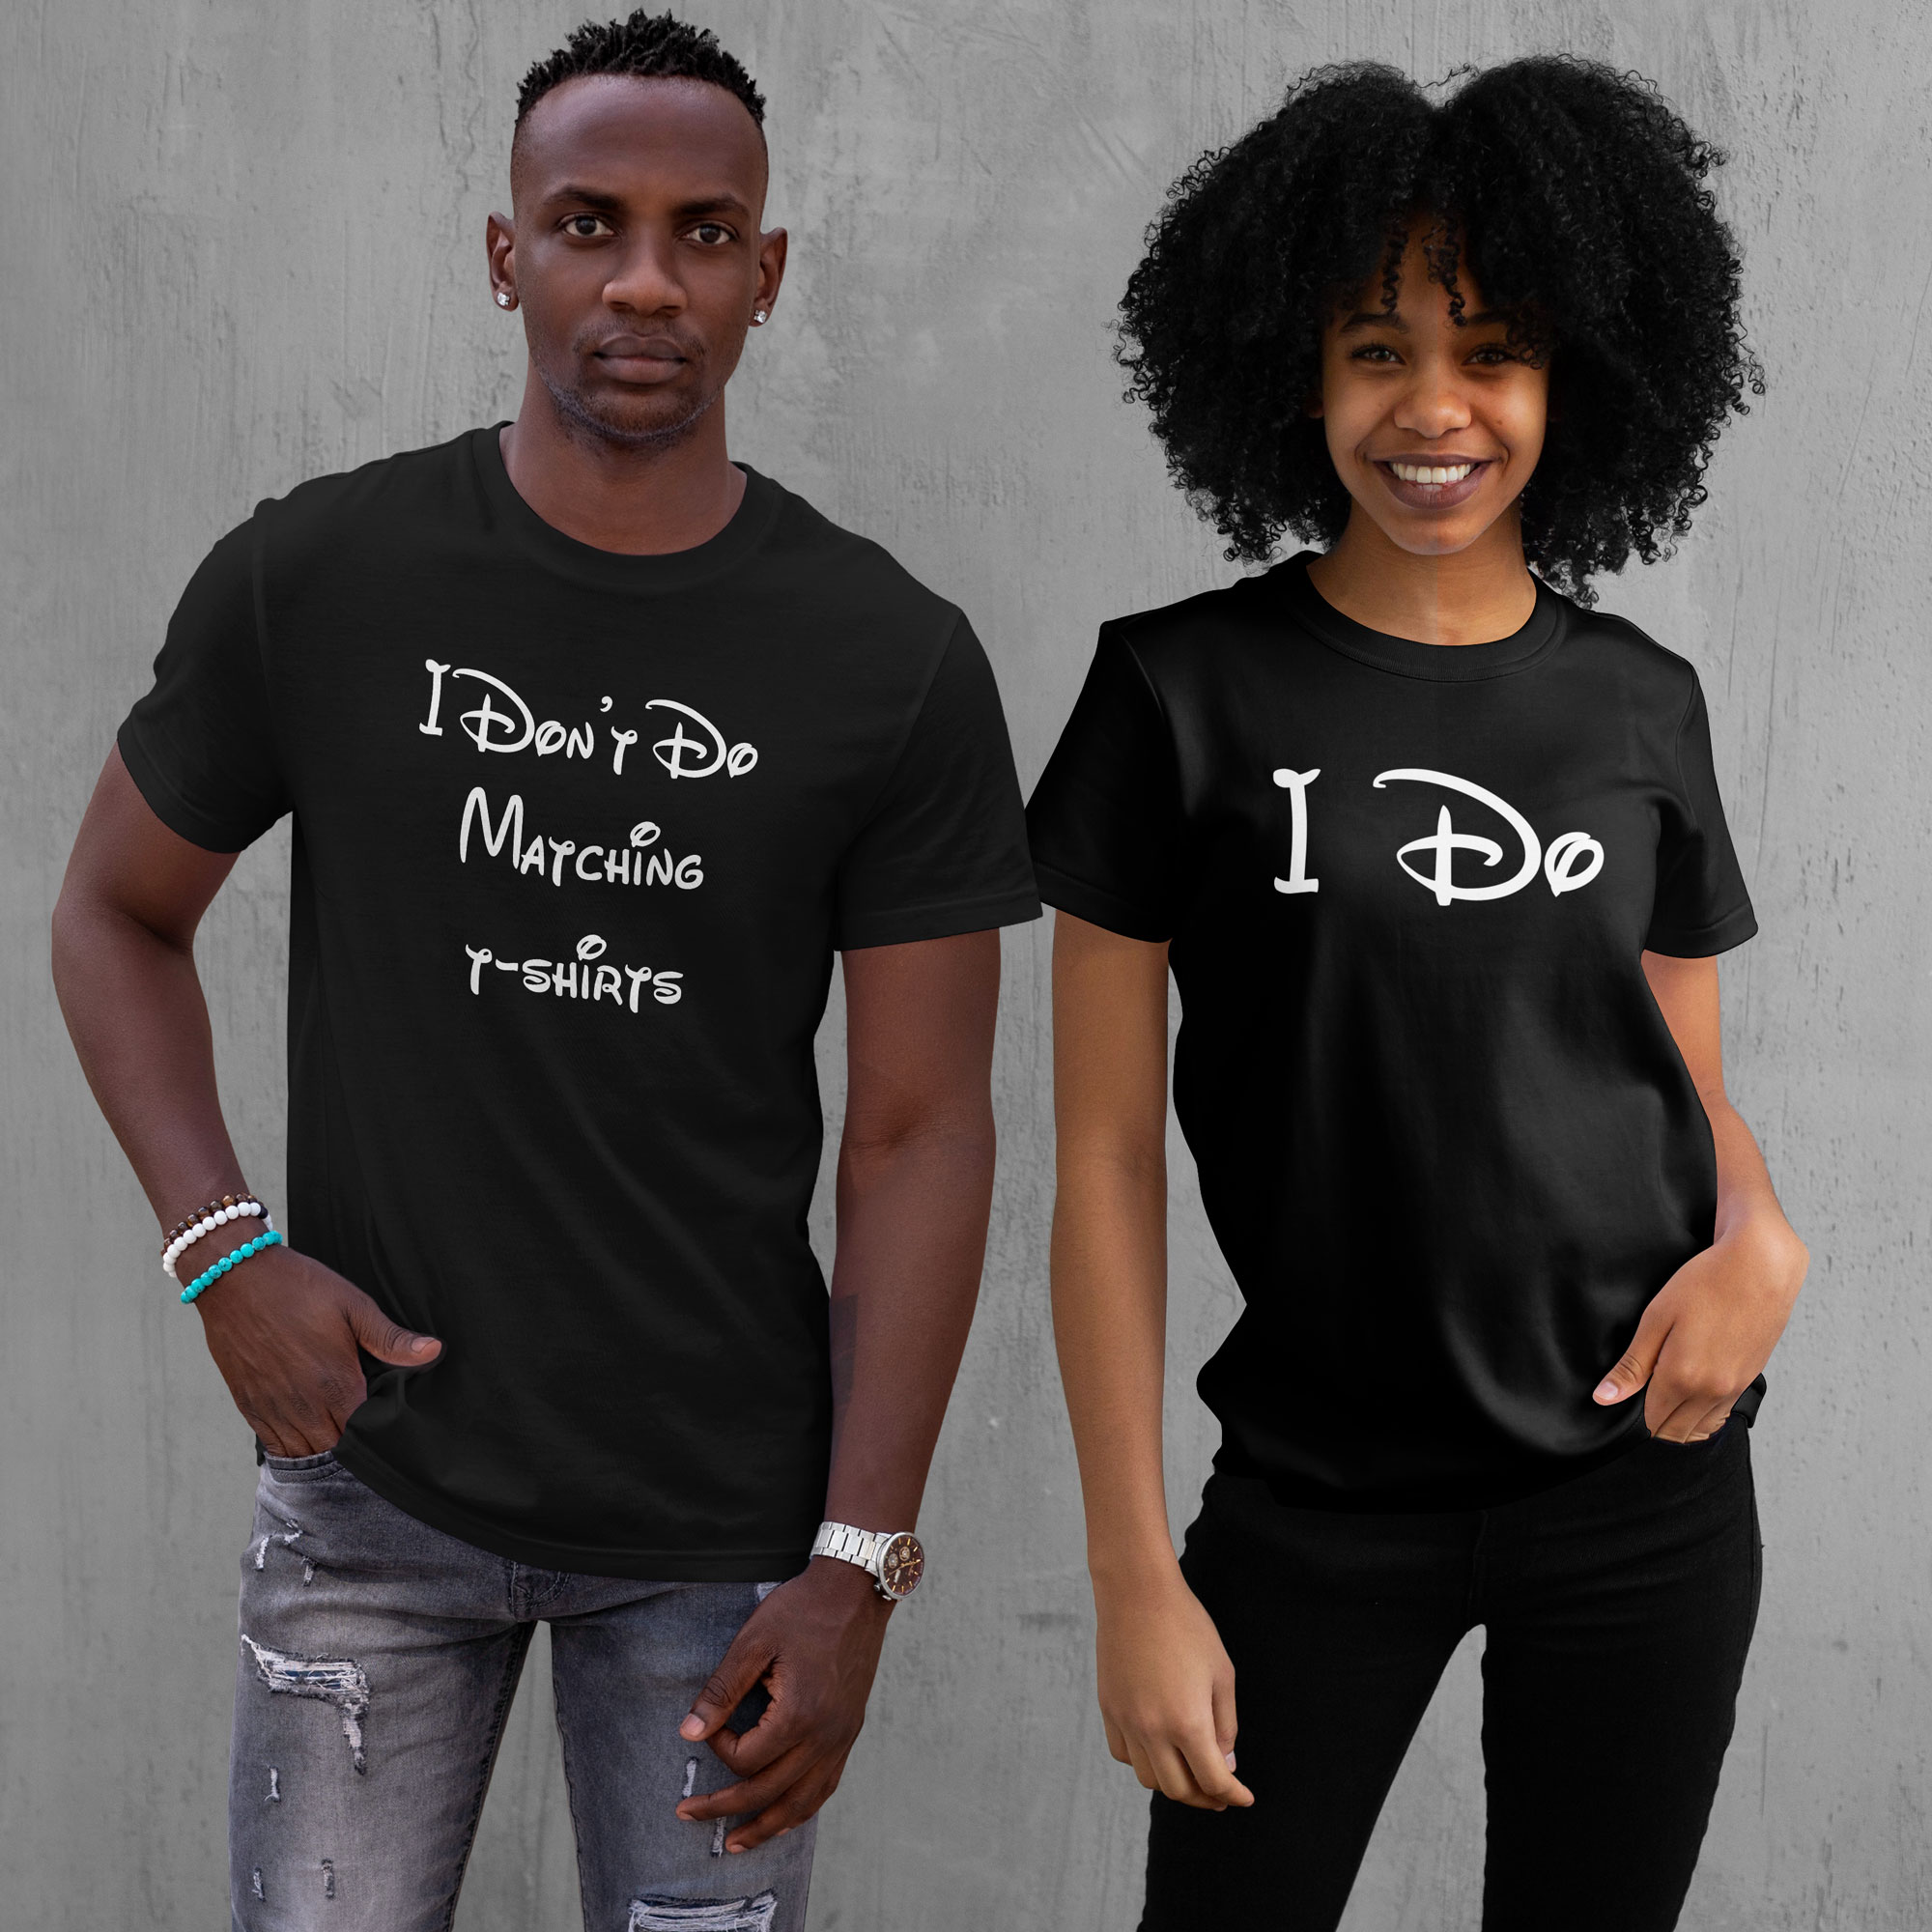 I Don't Do Matching T-Shirts-But I Do Couples T-Shirt | His & Hers